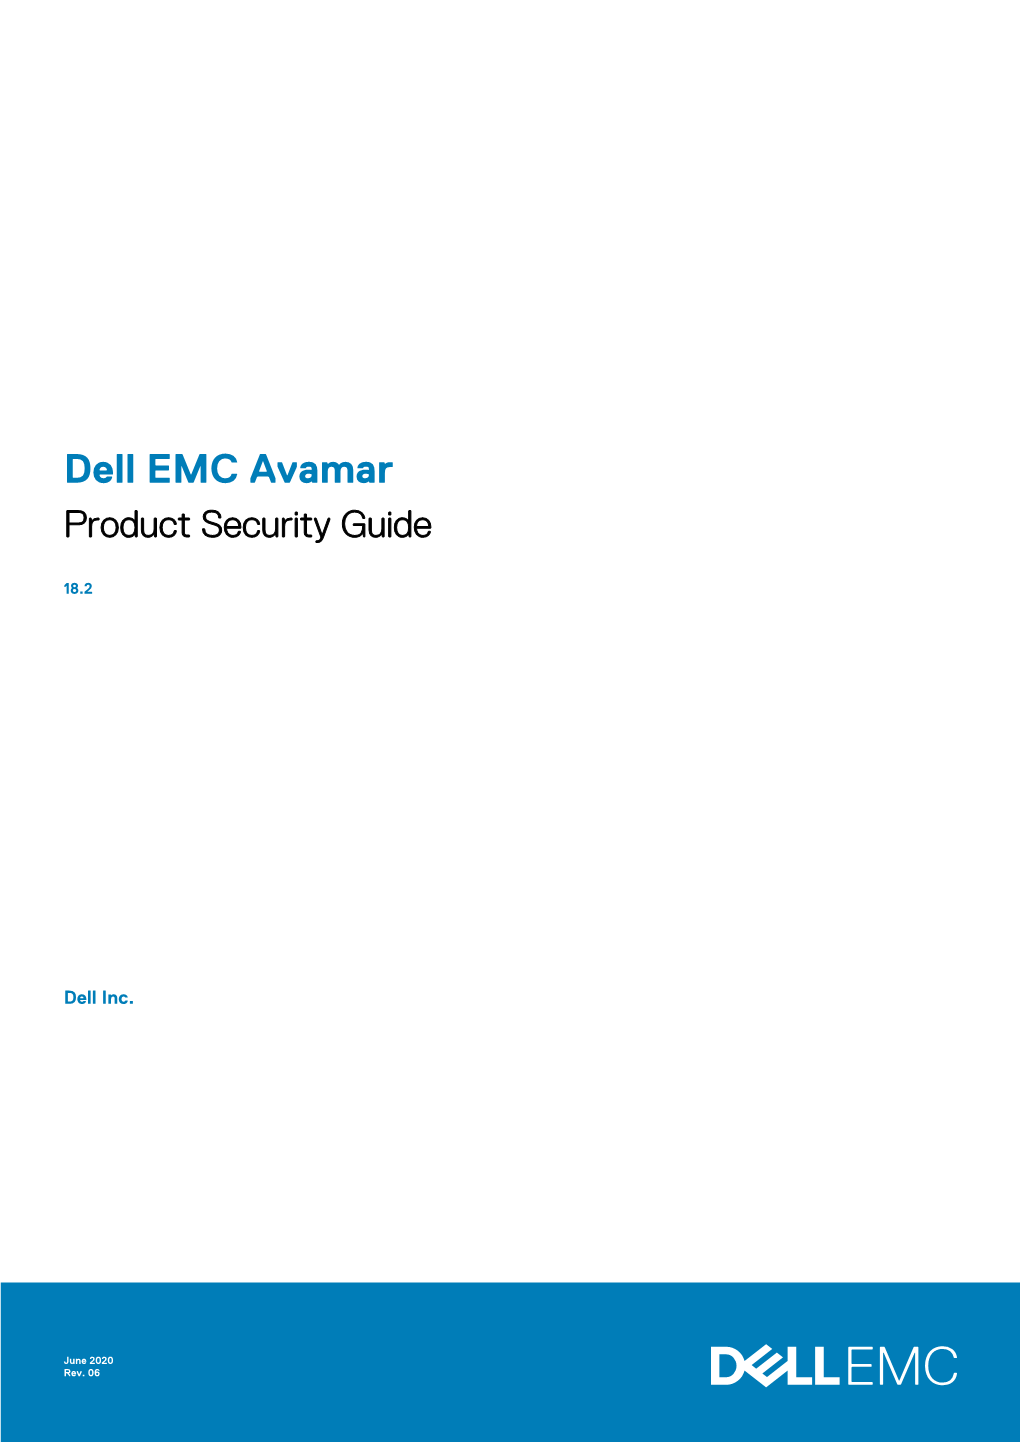 Avamar Product Security Guide